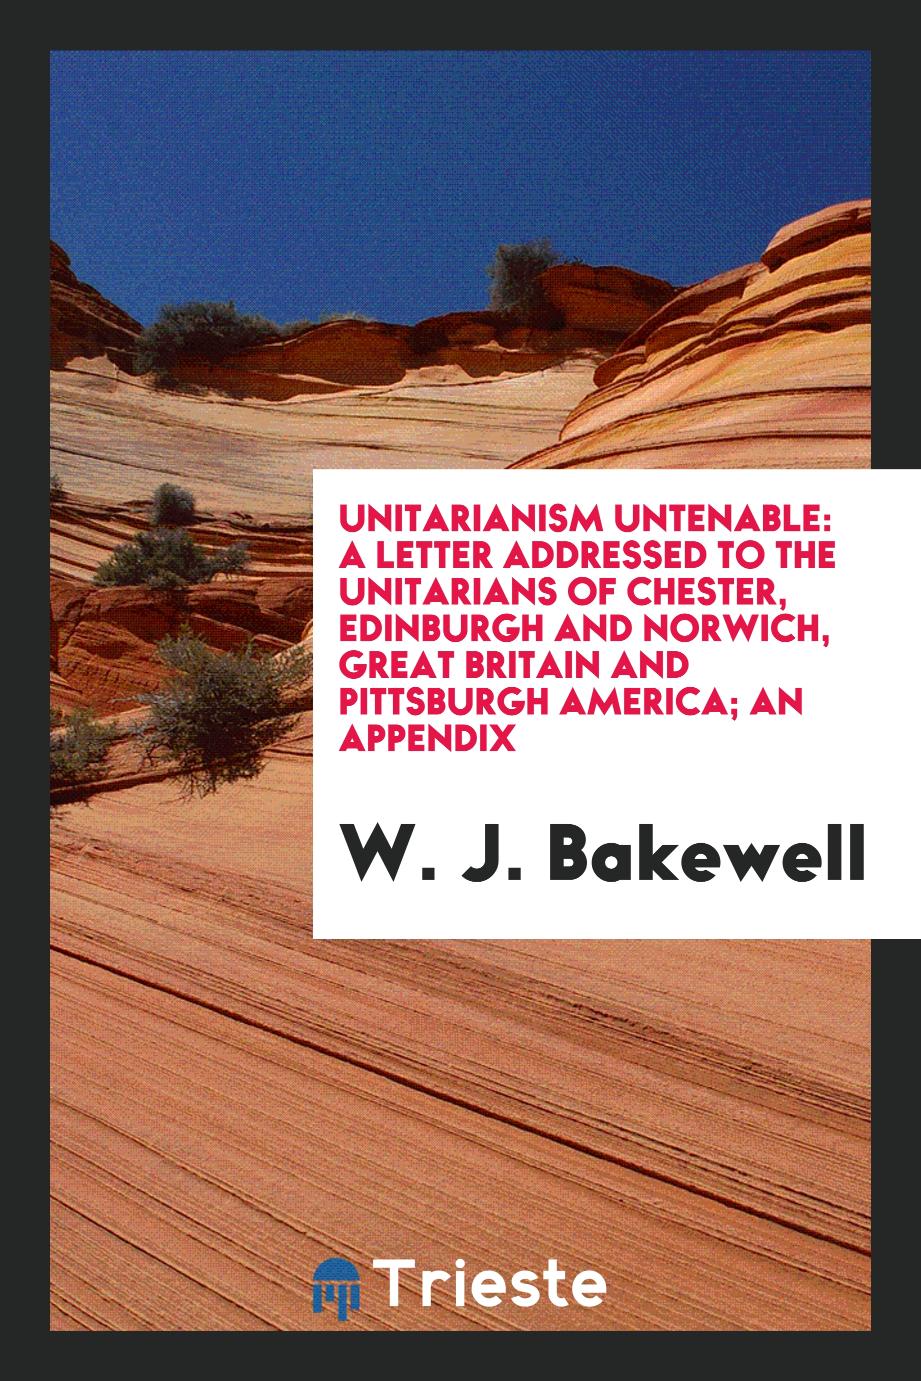 Unitarianism Untenable: A Letter Addressed to the Unitarians of Chester, Edinburgh and Norwich, Great Britain and Pittsburgh America; An Appendix